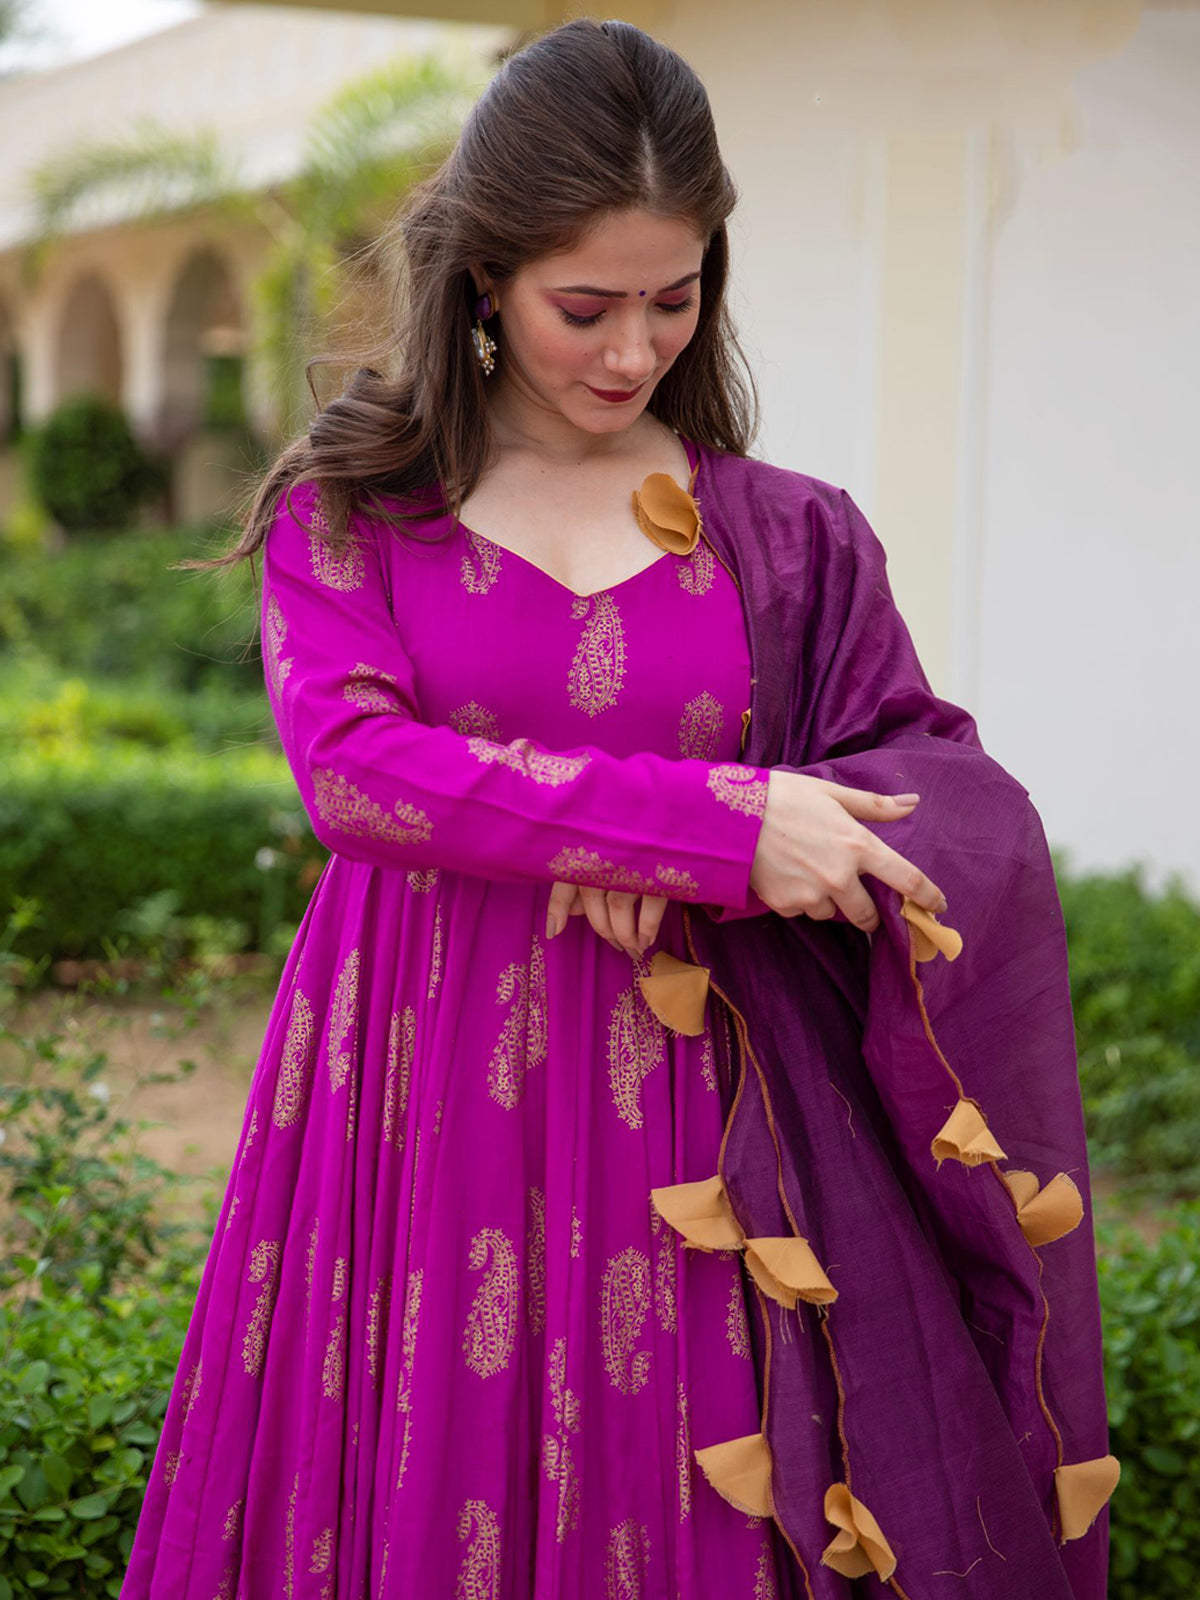 Odette Purple Rayon Gold Foil Work Gown with Dupatta for Women